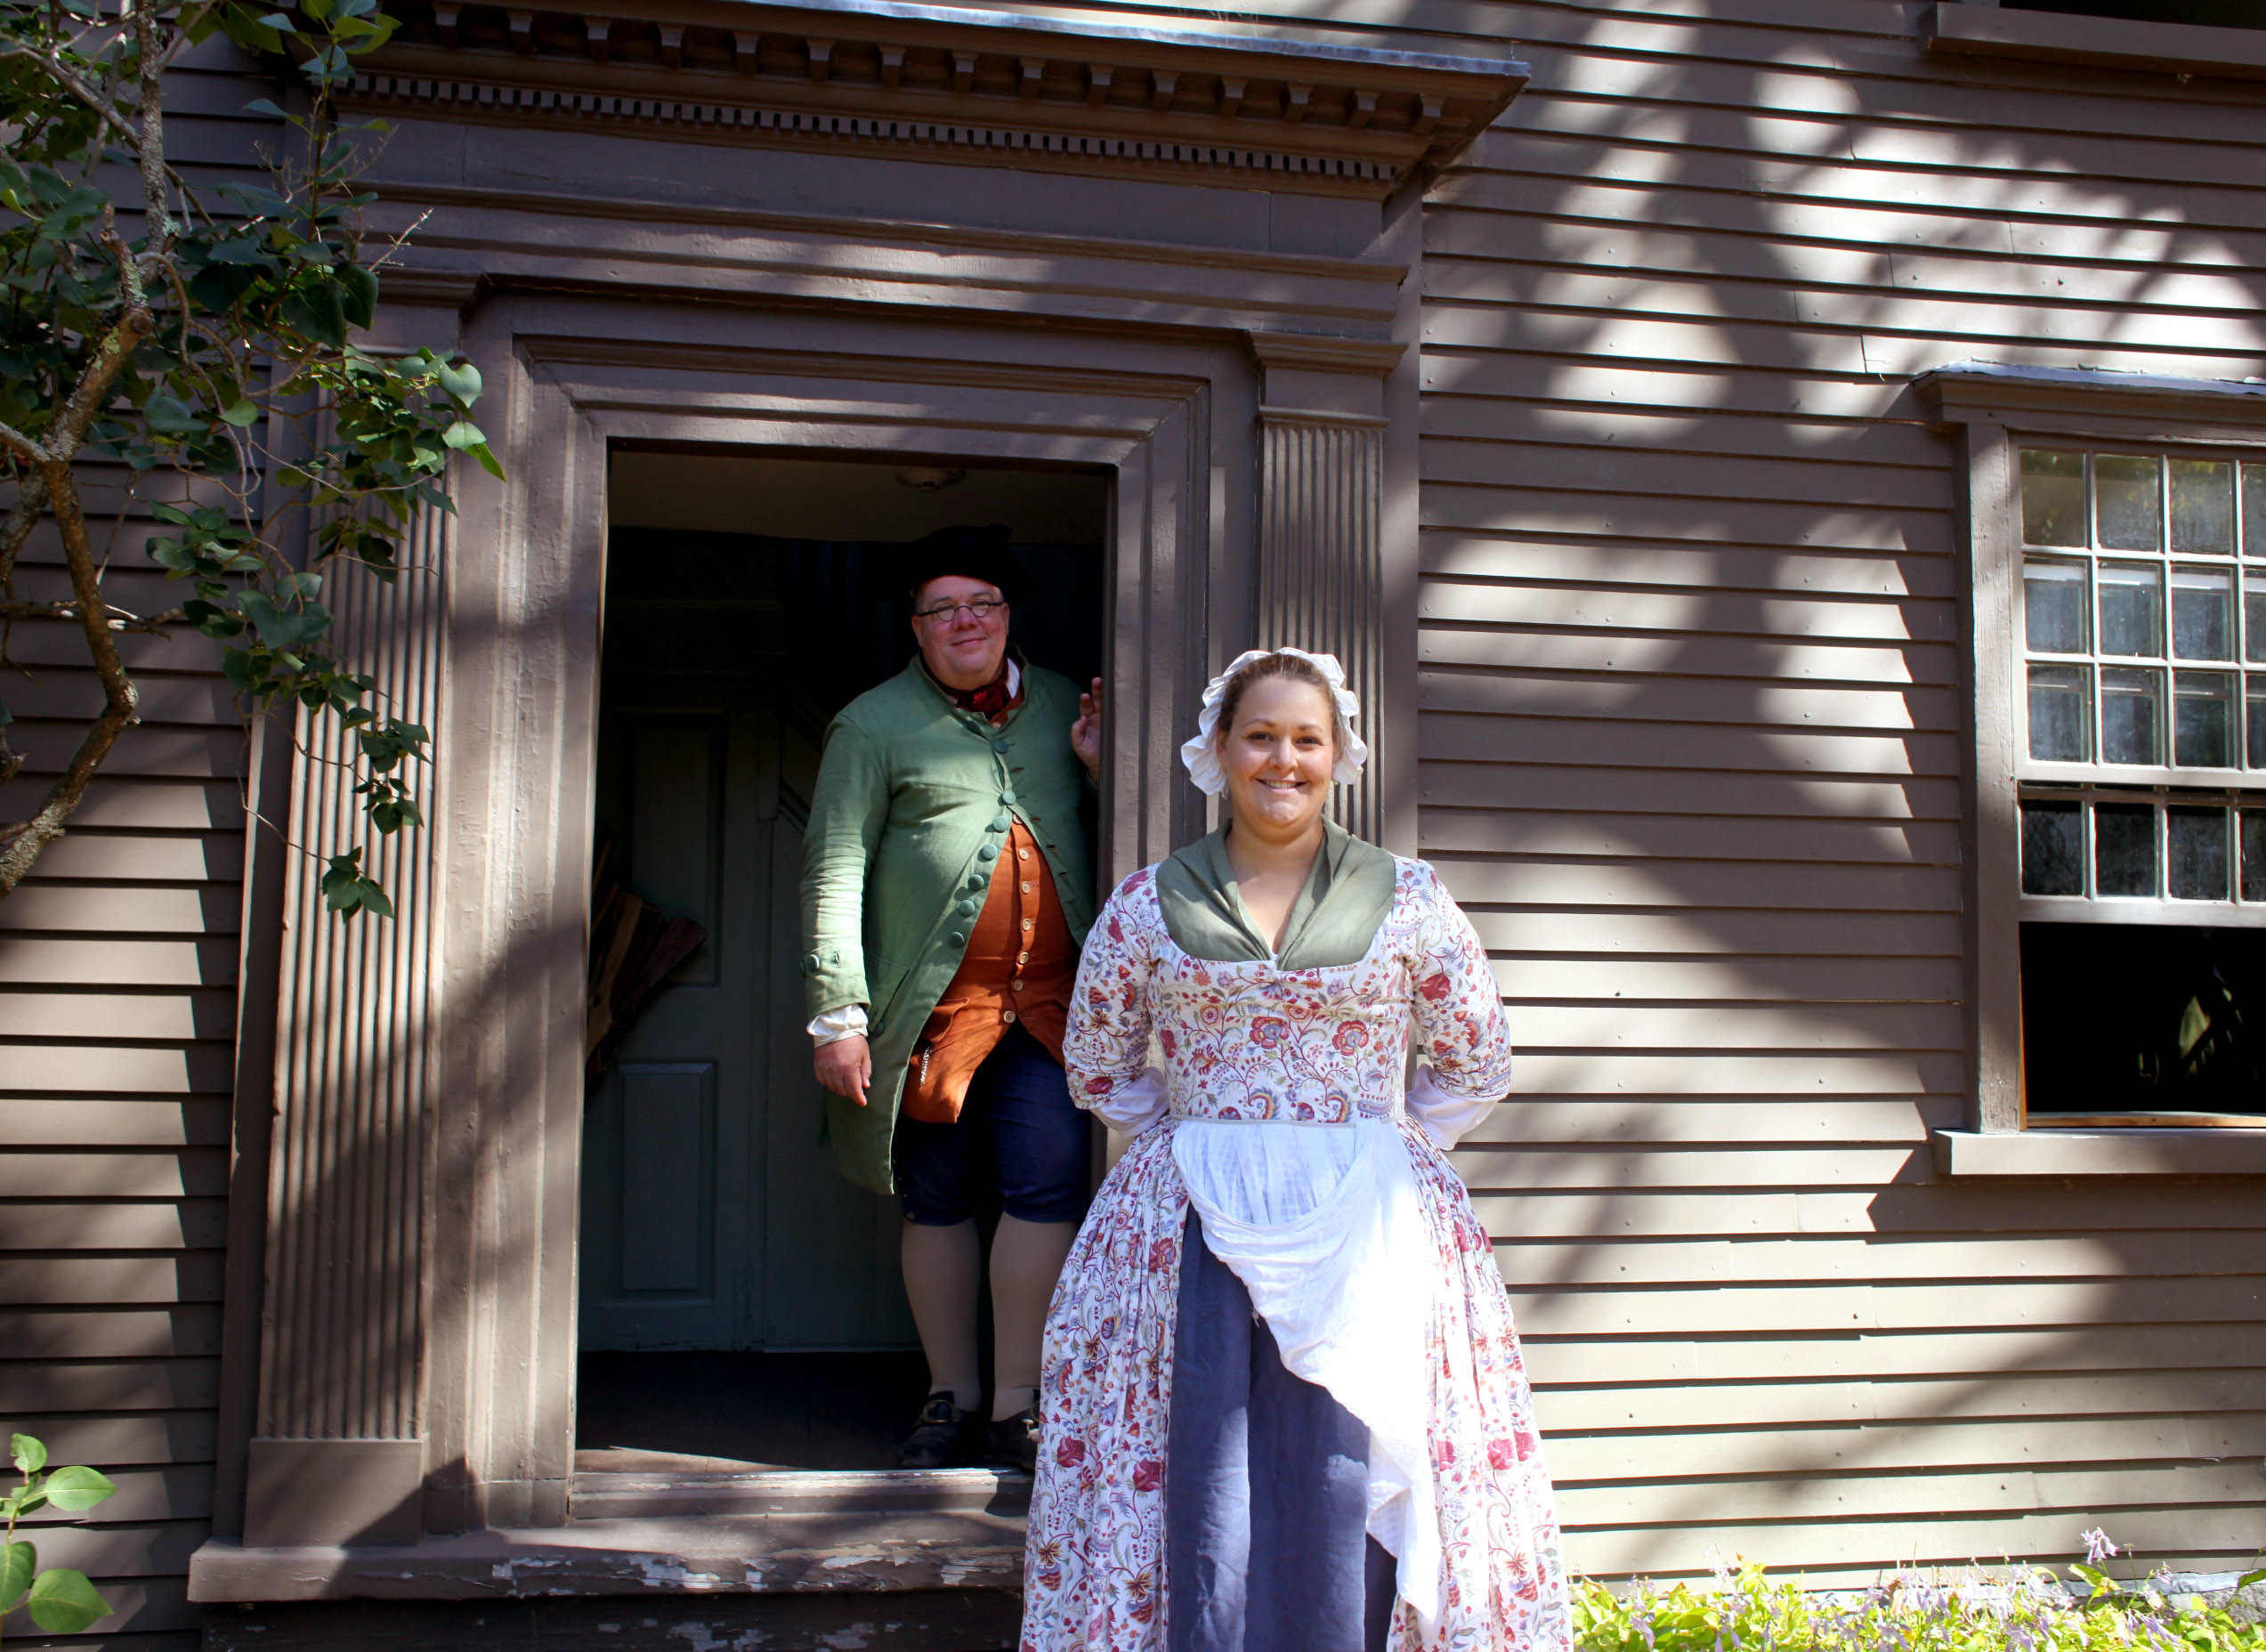 Park Ranger Rick and Monica greet you at the Whittemore House.